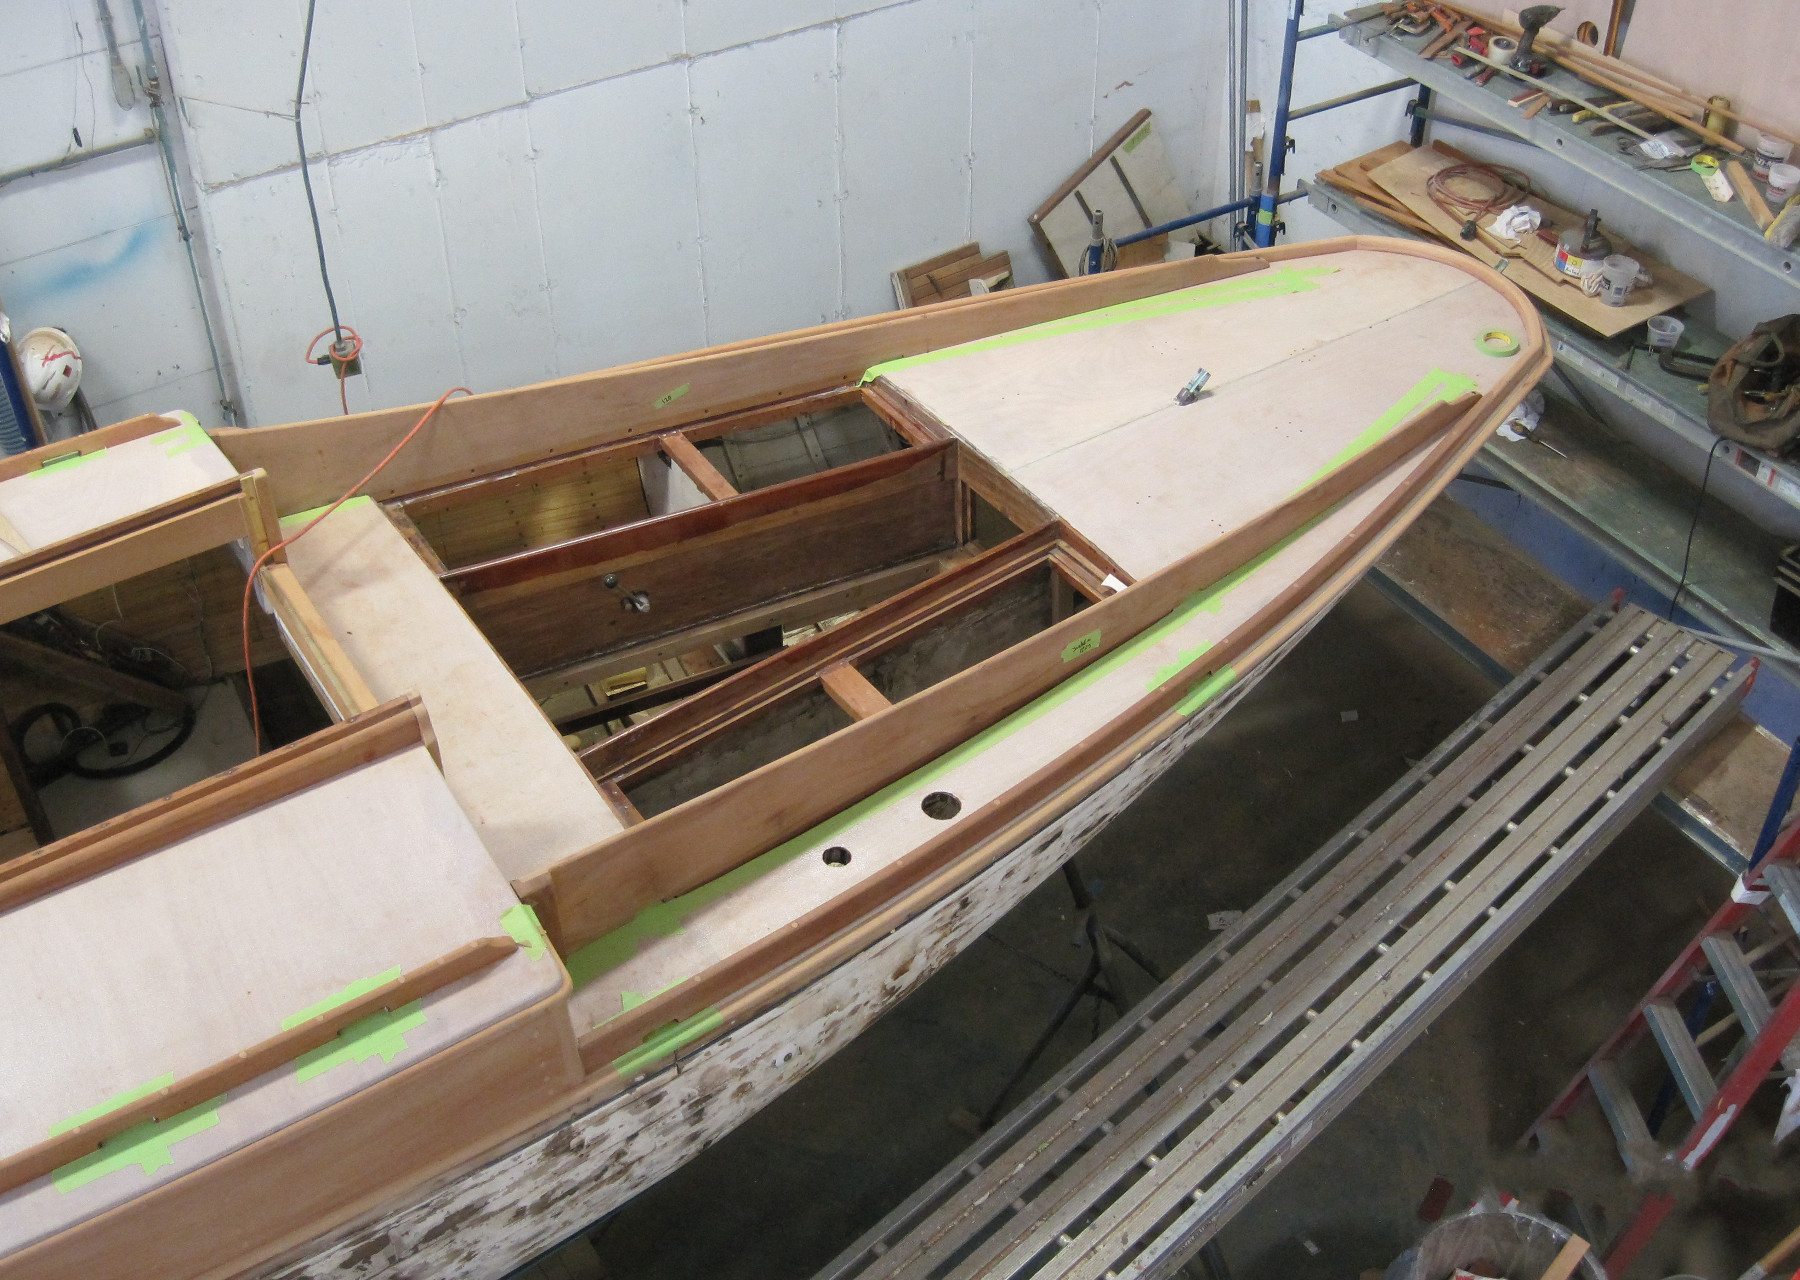 Wooden Boat Restoration - Kestrel - An overall view of the cockpit and deck work.